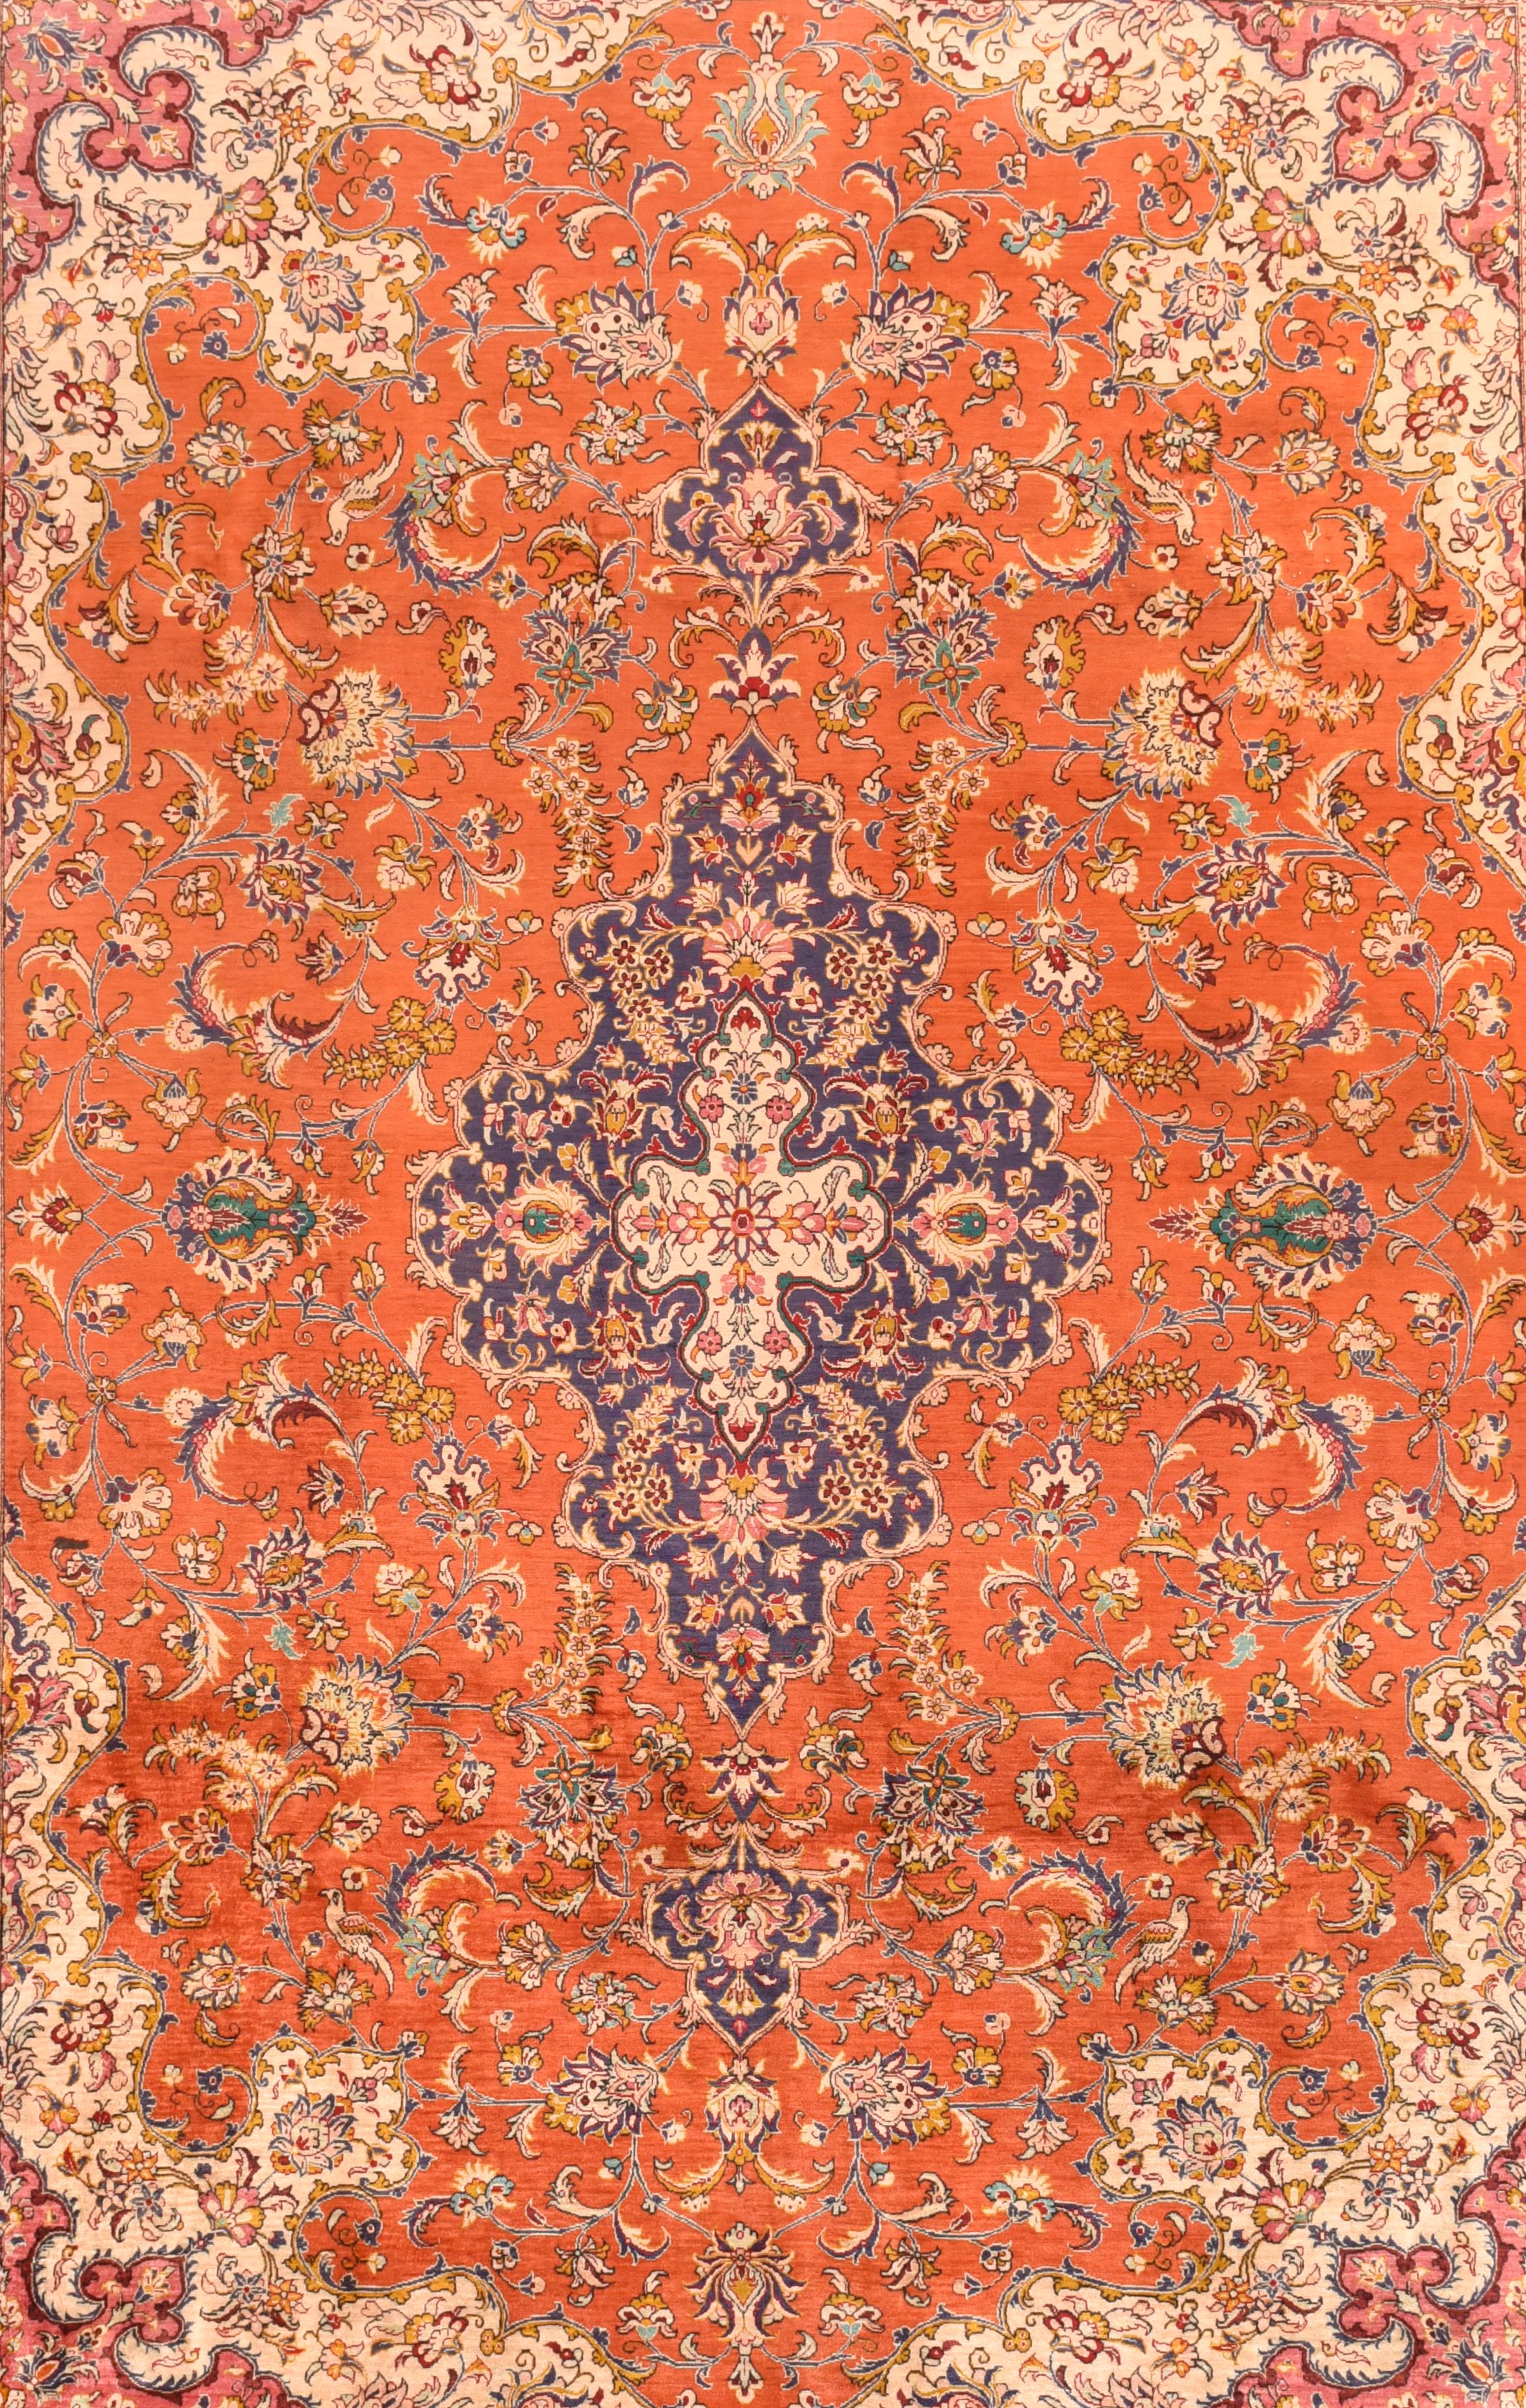 Vintage Persian Qum Area rug, silk on silk, hand knotted, Circa 1970's

Design : Center Medallion

Qom rugs (or Qum, Ghom, Ghum) are made in the Qom Province of Iran, around 100 km south of Tehran. Although rug weaving in Qom was not a major